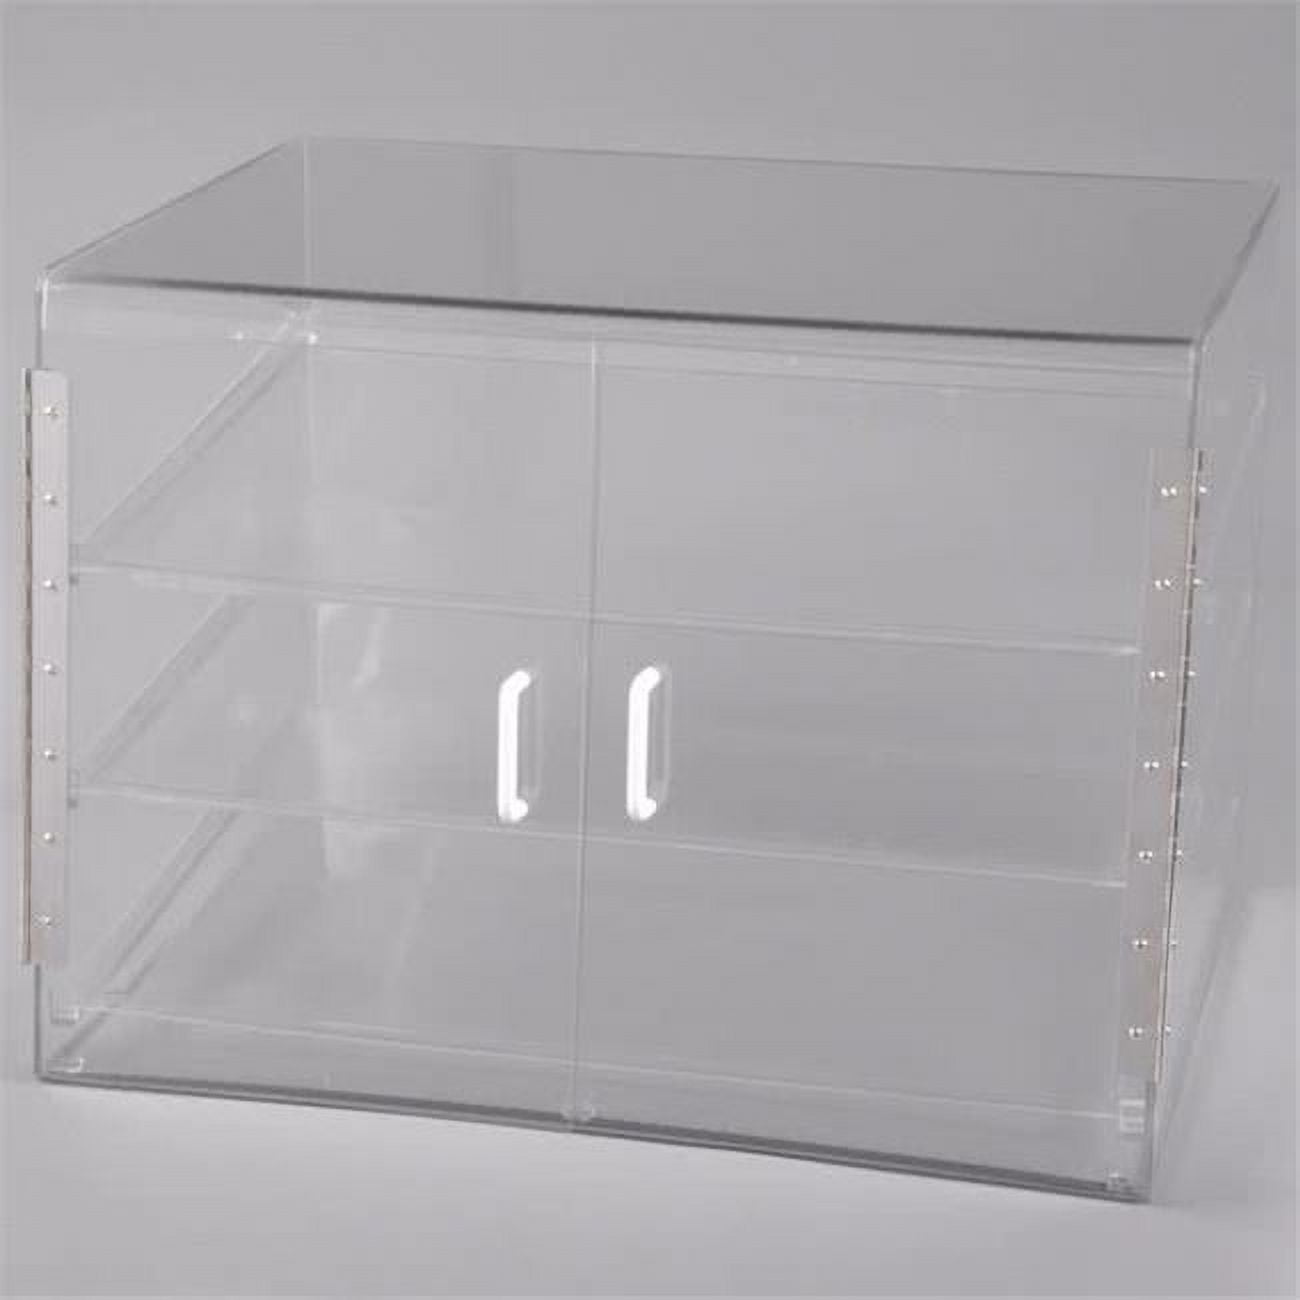 Picture of Cal Mil 1202-S 3 Tray Large Economy Case - Clear